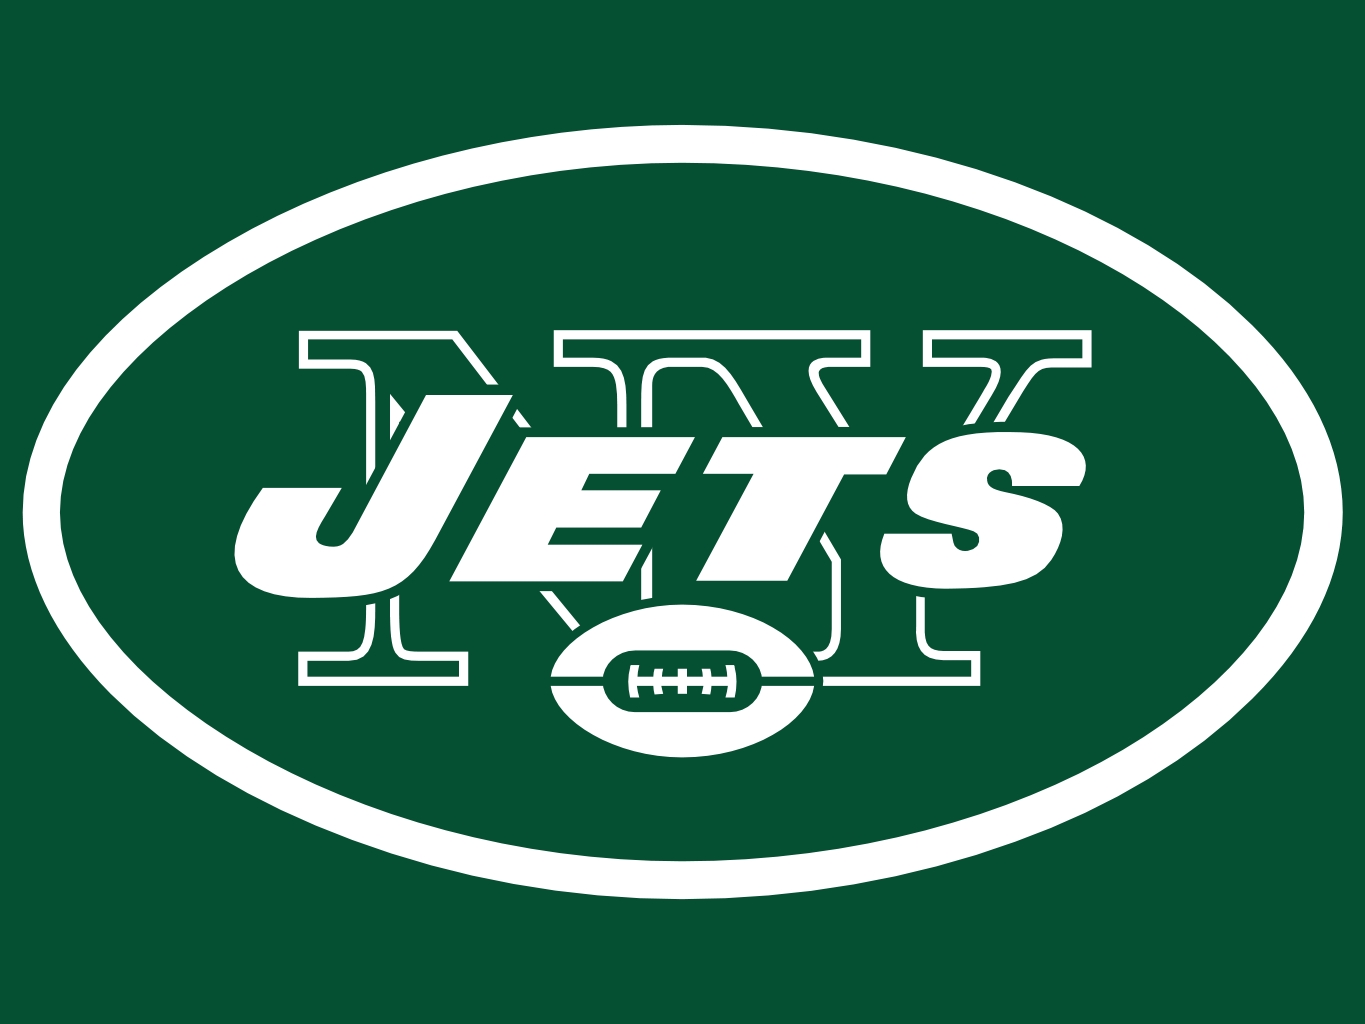 Buy New York Jets Tickets Today